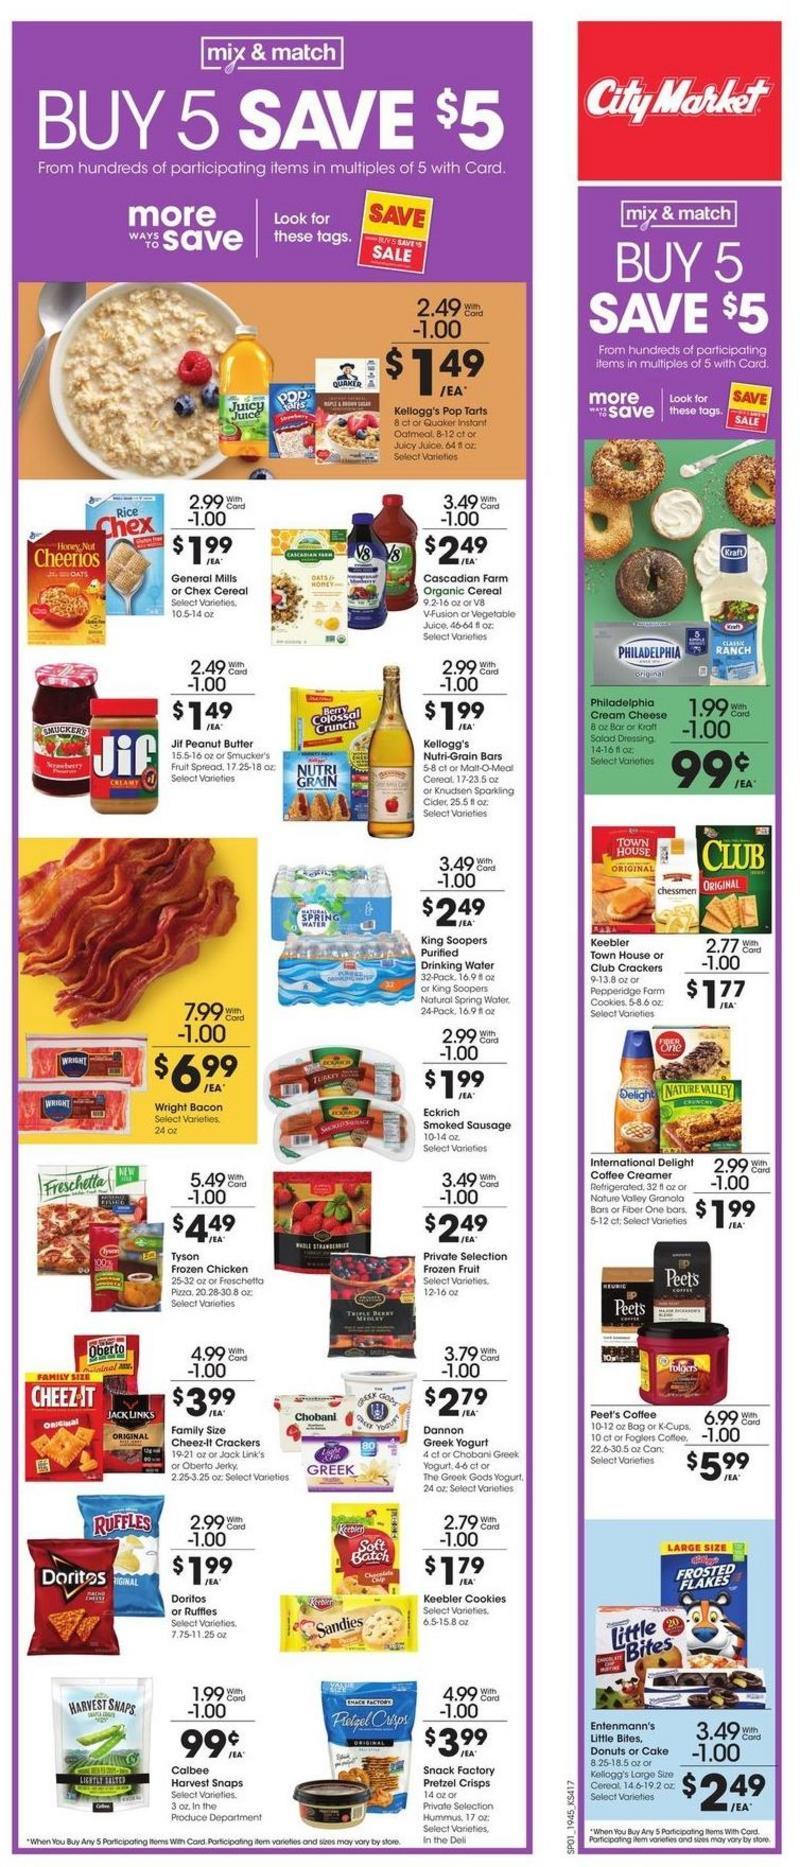 City Market Weekly Ad from December 11